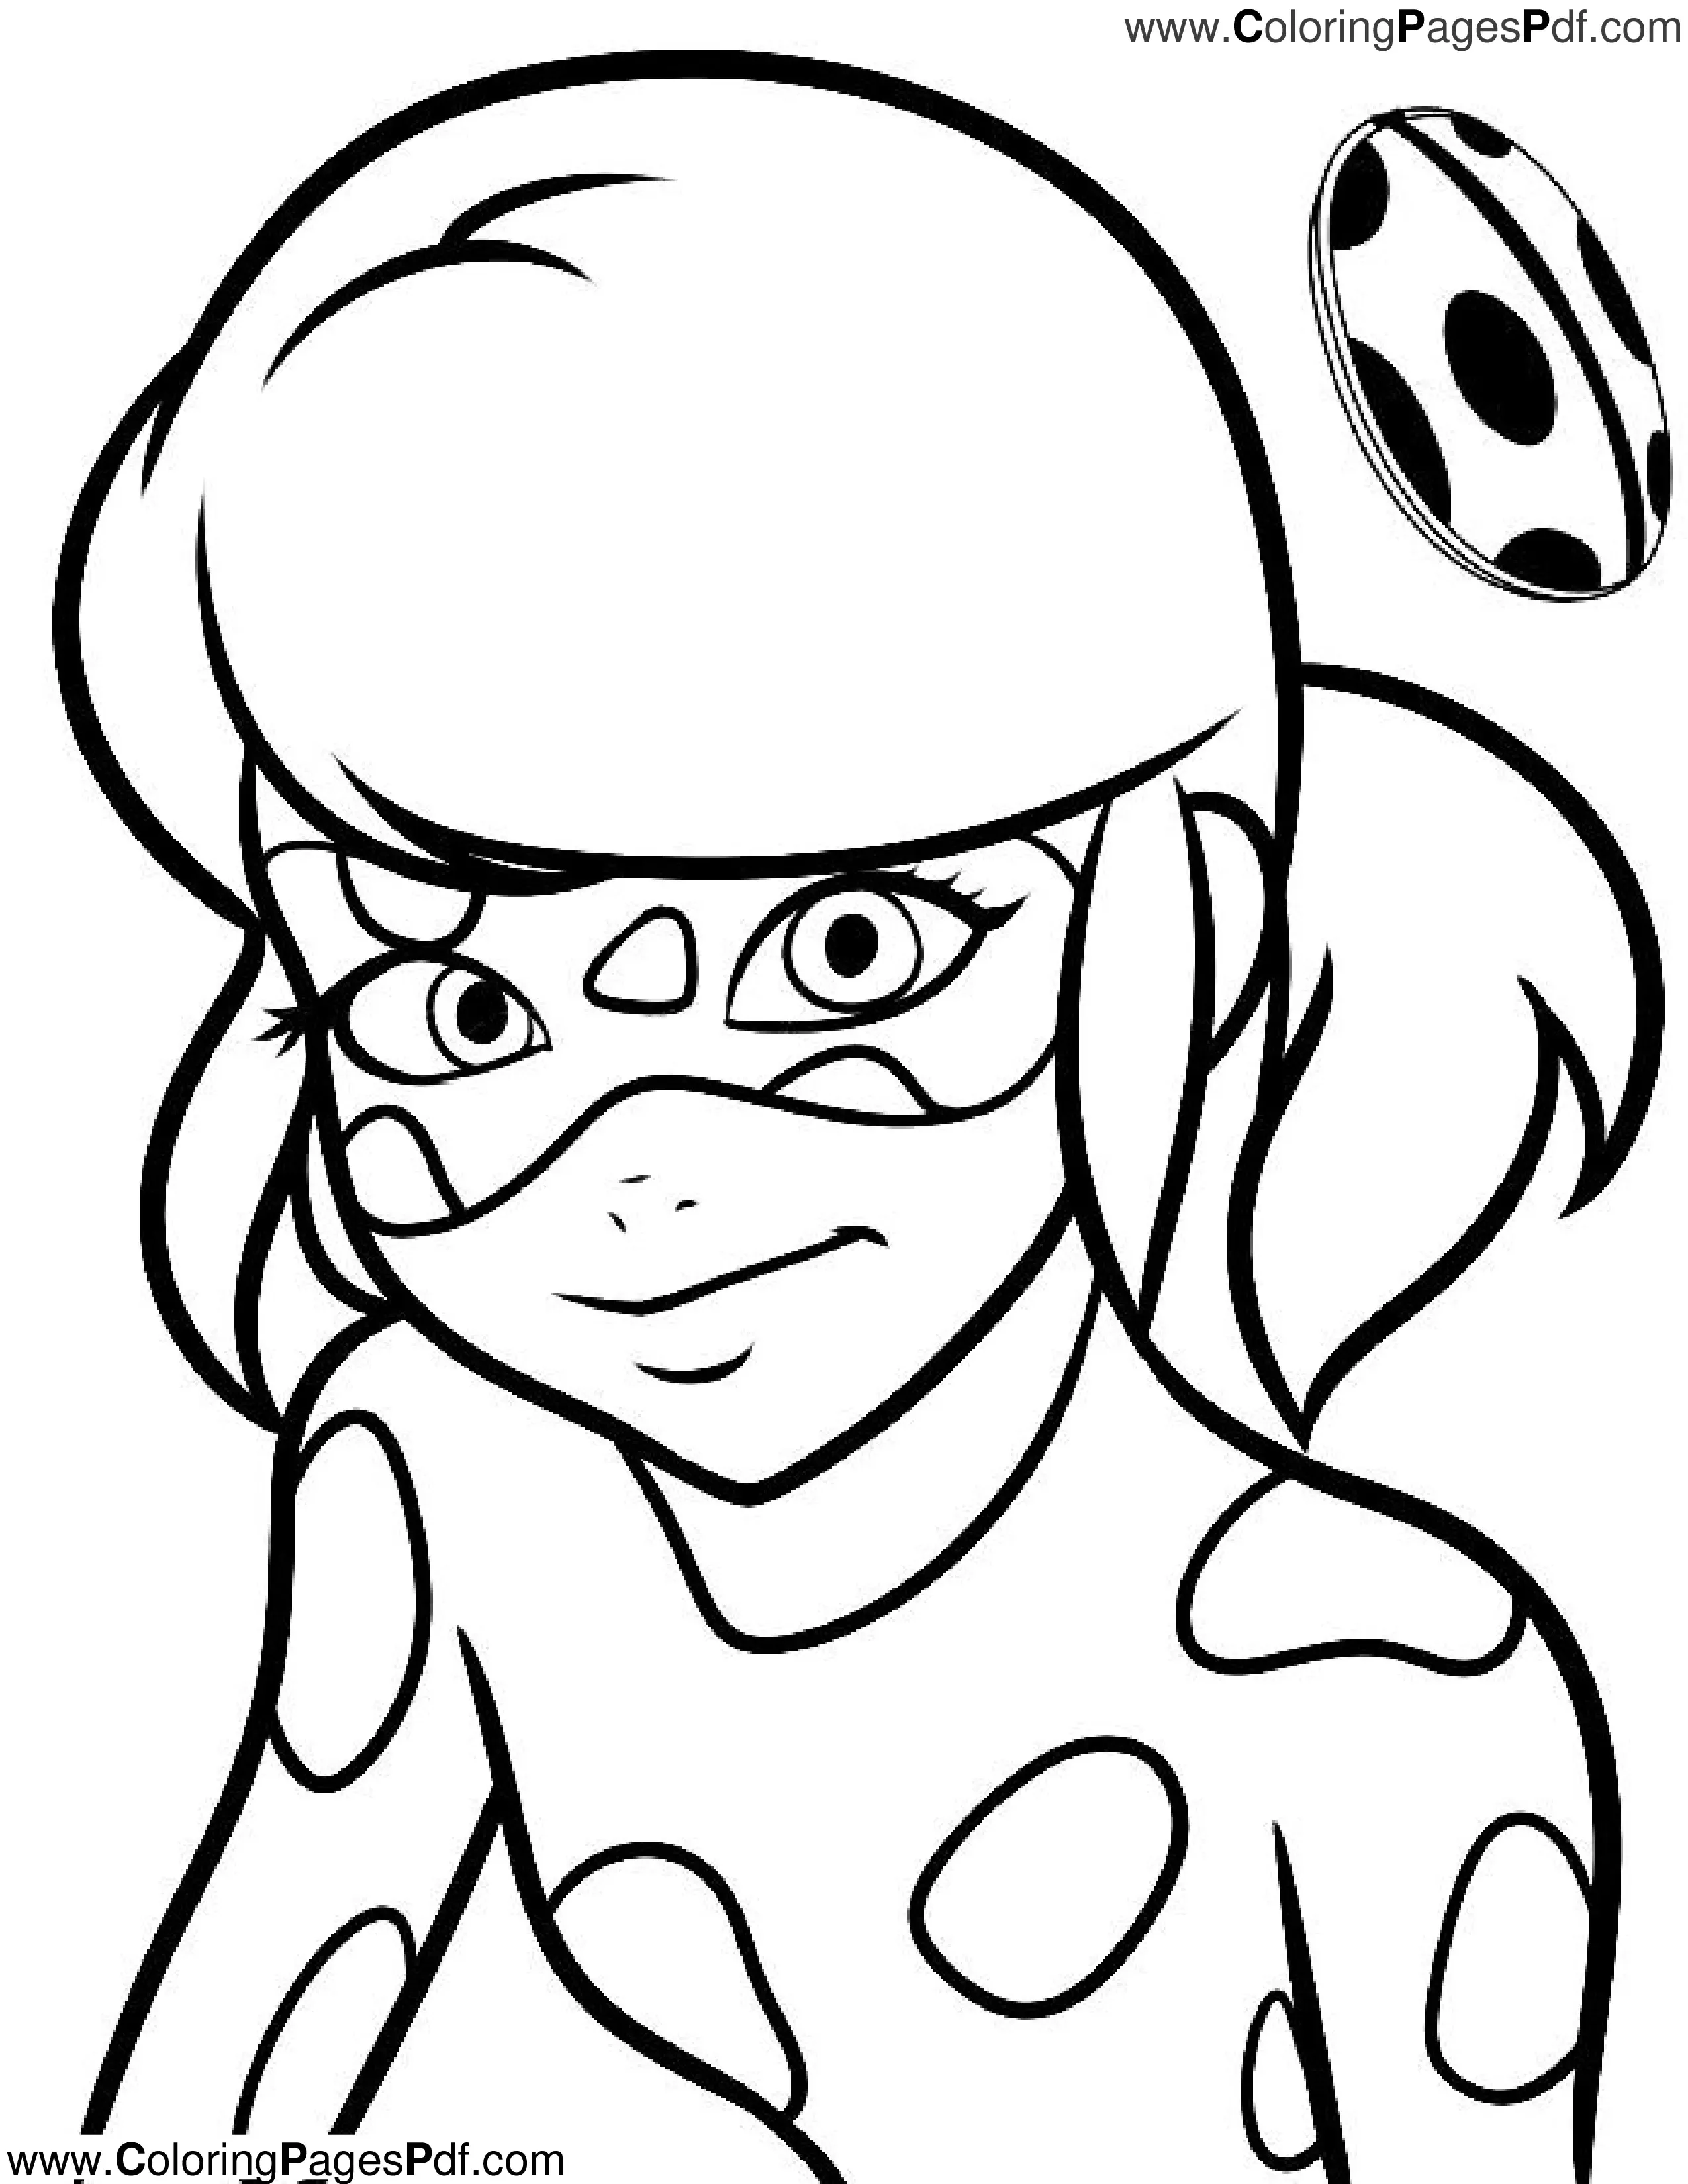 Marinette miraculous coloring pages